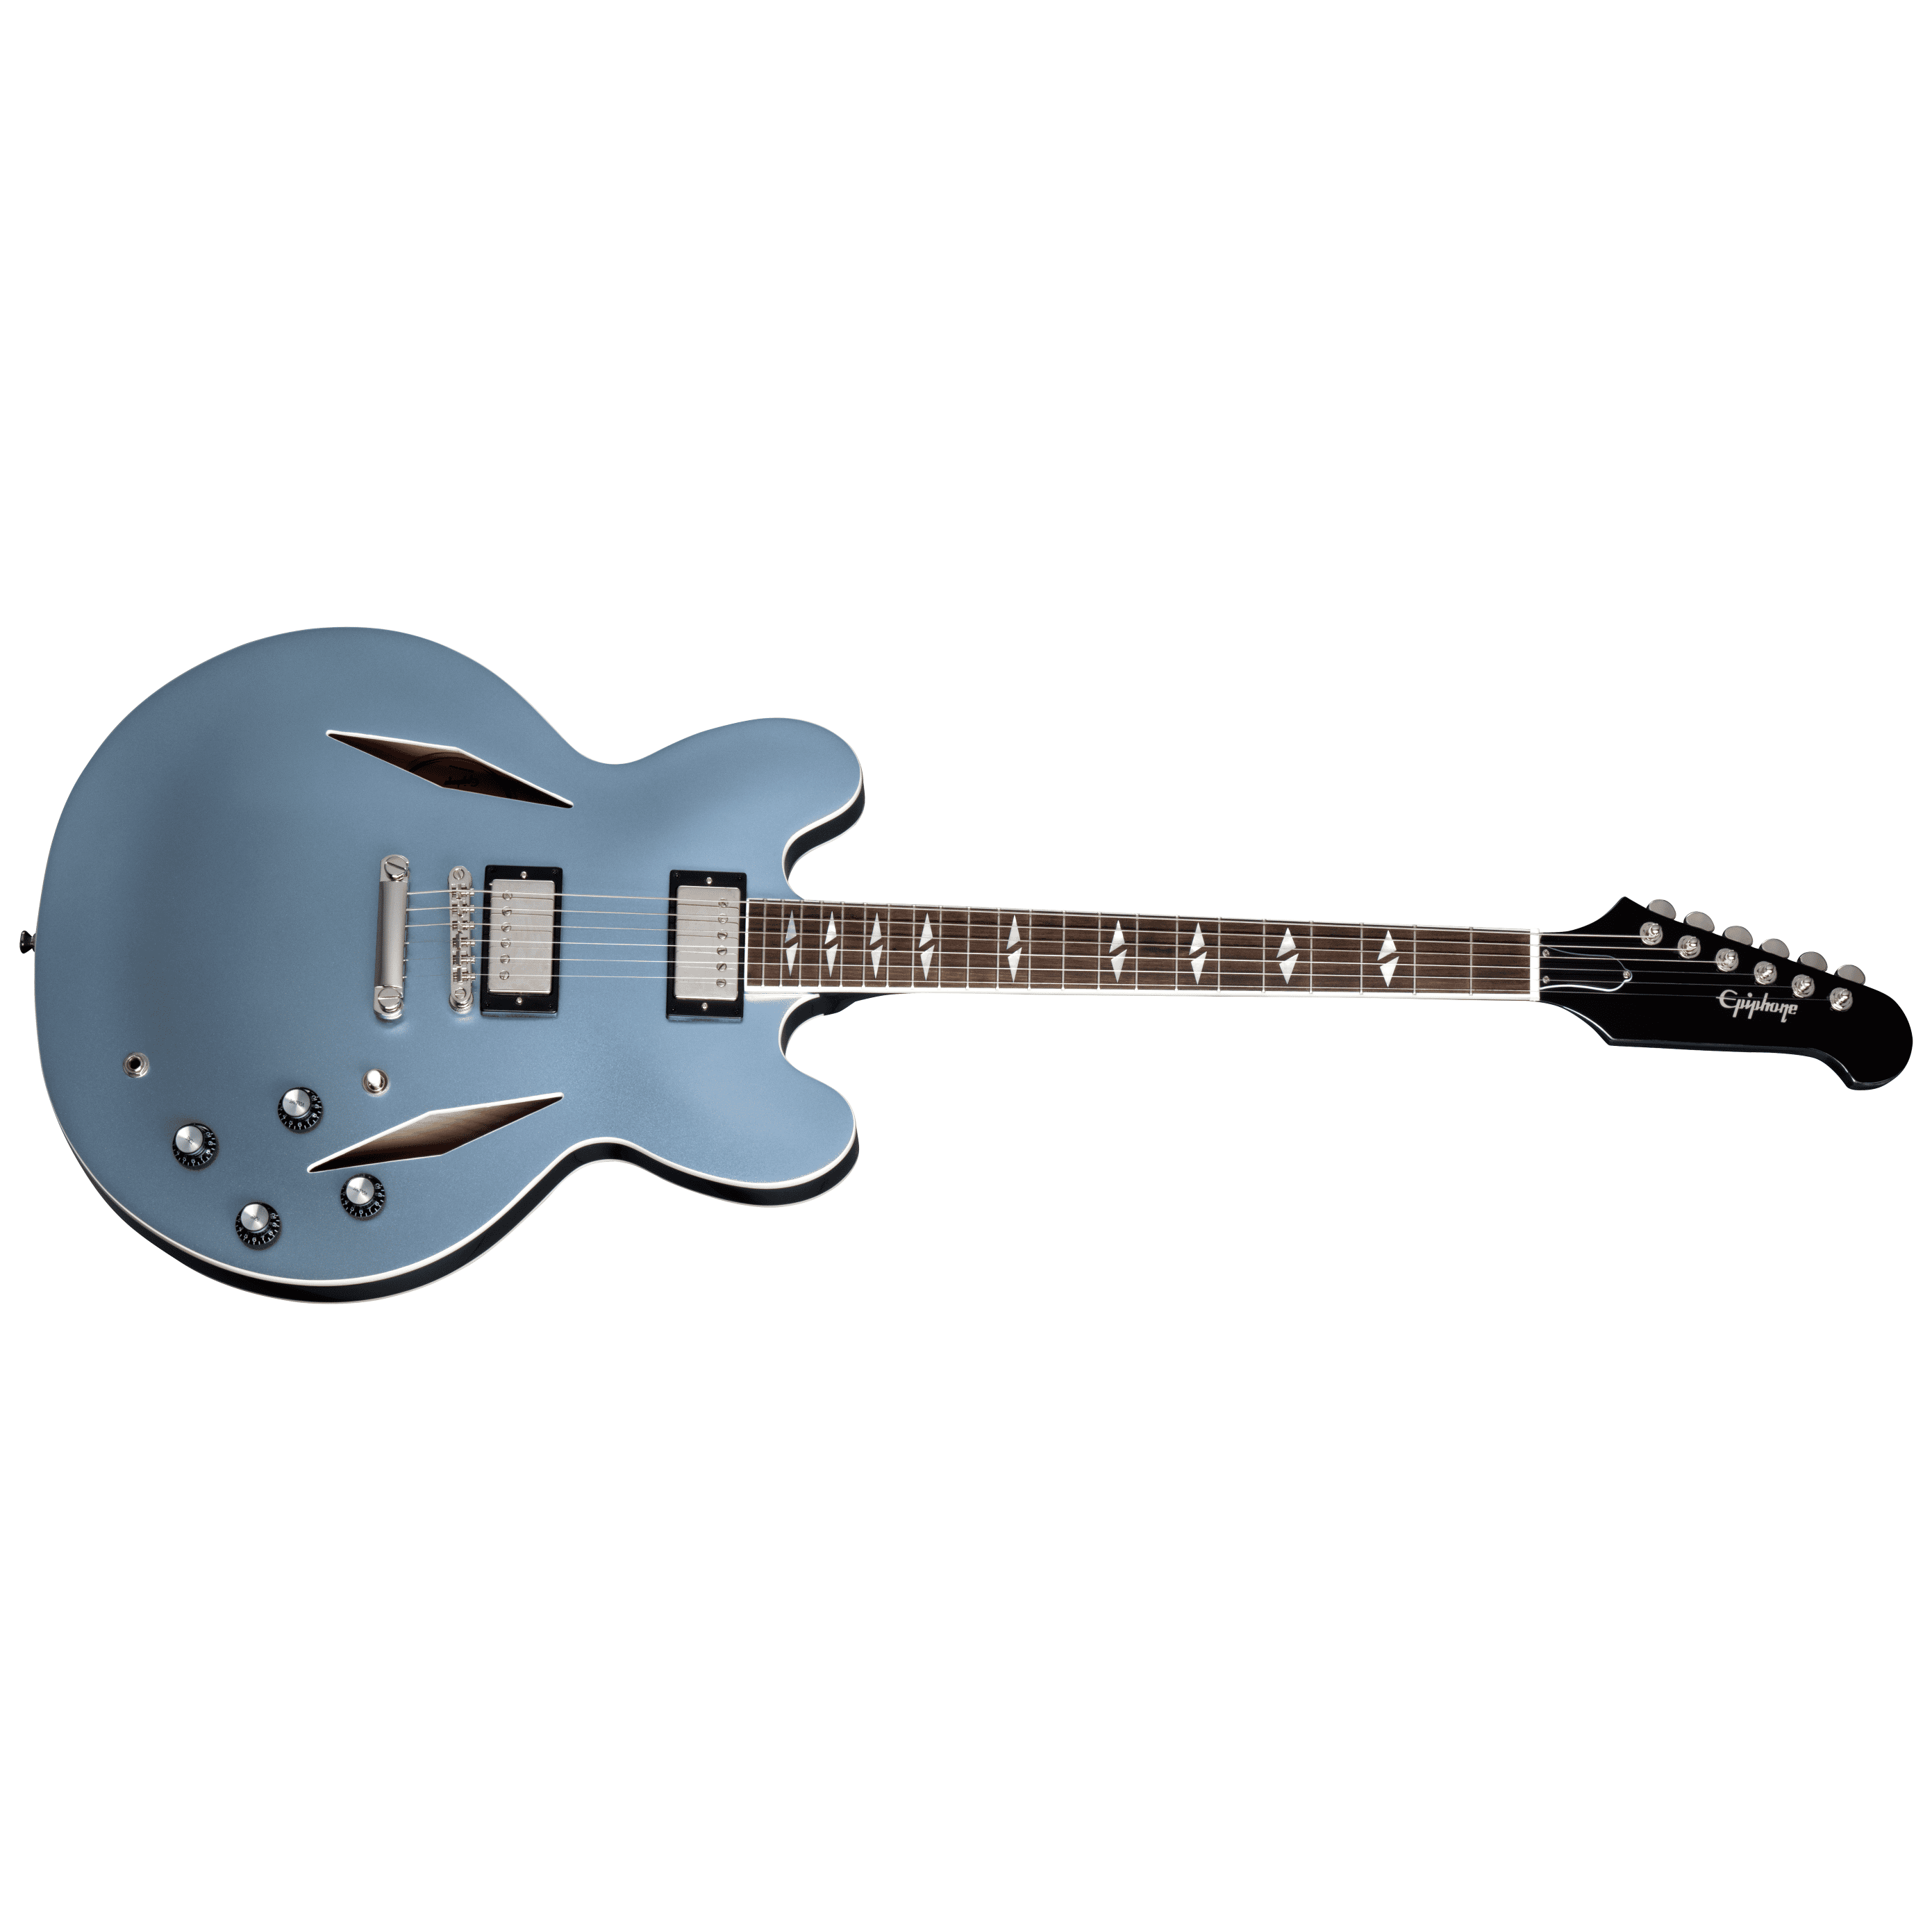 Epiphone Dave Grohl DG-335 1